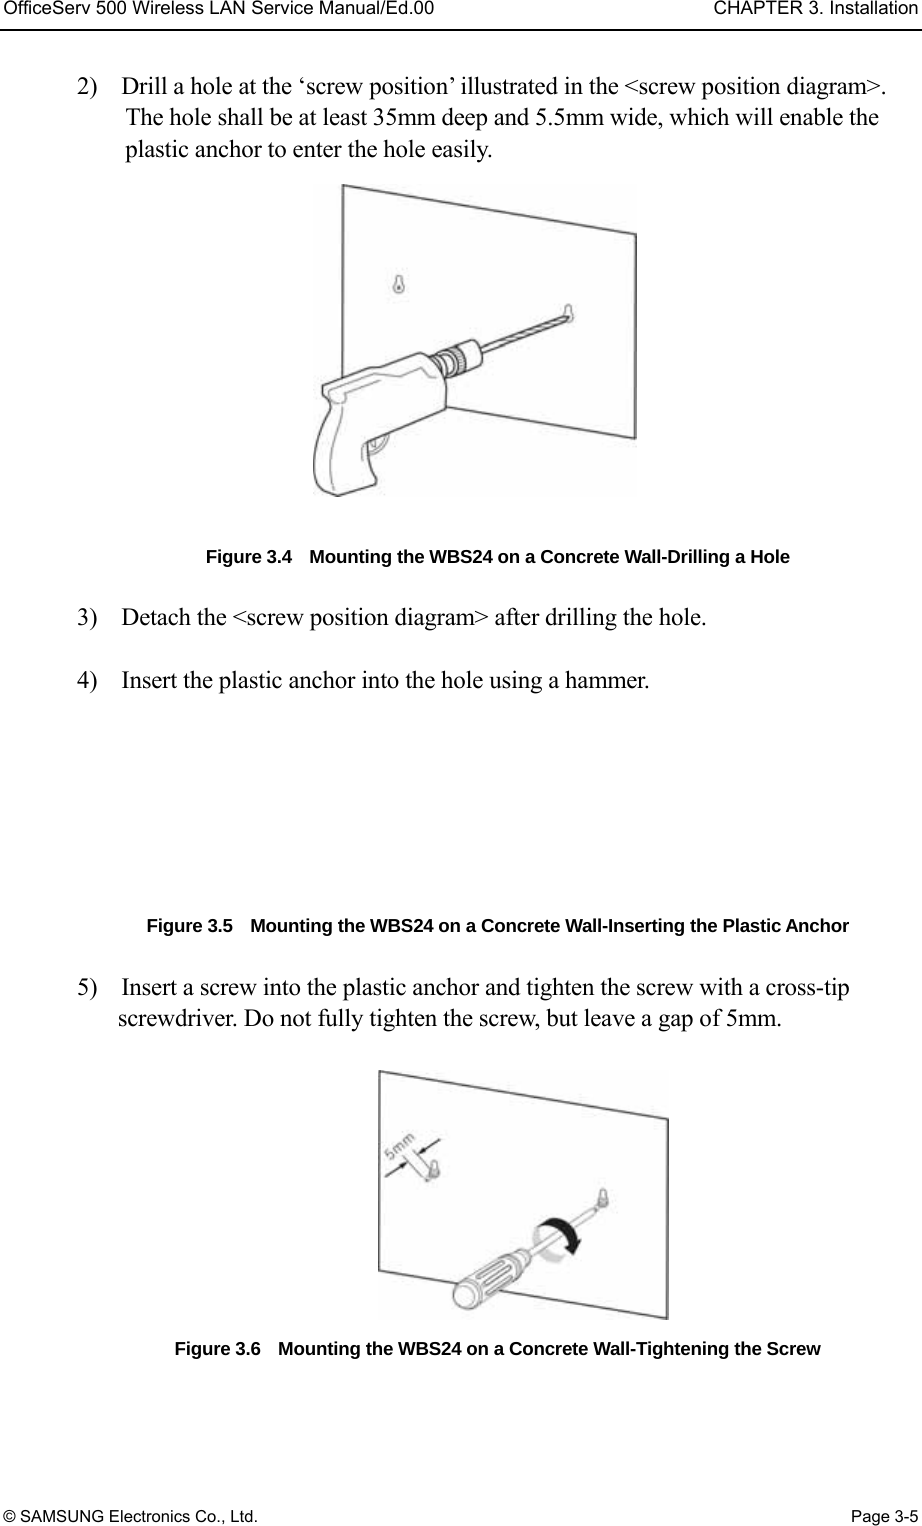 OfficeServ 500 Wireless LAN Service Manual/Ed.00  CHAPTER 3. Installation © SAMSUNG Electronics Co., Ltd.  Page 3-5 2)    Drill a hole at the ‘screw position’ illustrated in the &lt;screw position diagram&gt;. The hole shall be at least 35mm deep and 5.5mm wide, which will enable the plastic anchor to enter the hole easily.    Figure 3.4    Mounting the WBS24 on a Concrete Wall-Drilling a Hole  3)    Detach the &lt;screw position diagram&gt; after drilling the hole.    4)    Insert the plastic anchor into the hole using a hammer.    Figure 3.5    Mounting the WBS24 on a Concrete Wall-Inserting the Plastic Anchor  5)    Insert a screw into the plastic anchor and tighten the screw with a cross-tip screwdriver. Do not fully tighten the screw, but leave a gap of 5mm.    Figure 3.6    Mounting the WBS24 on a Concrete Wall-Tightening the Screw  